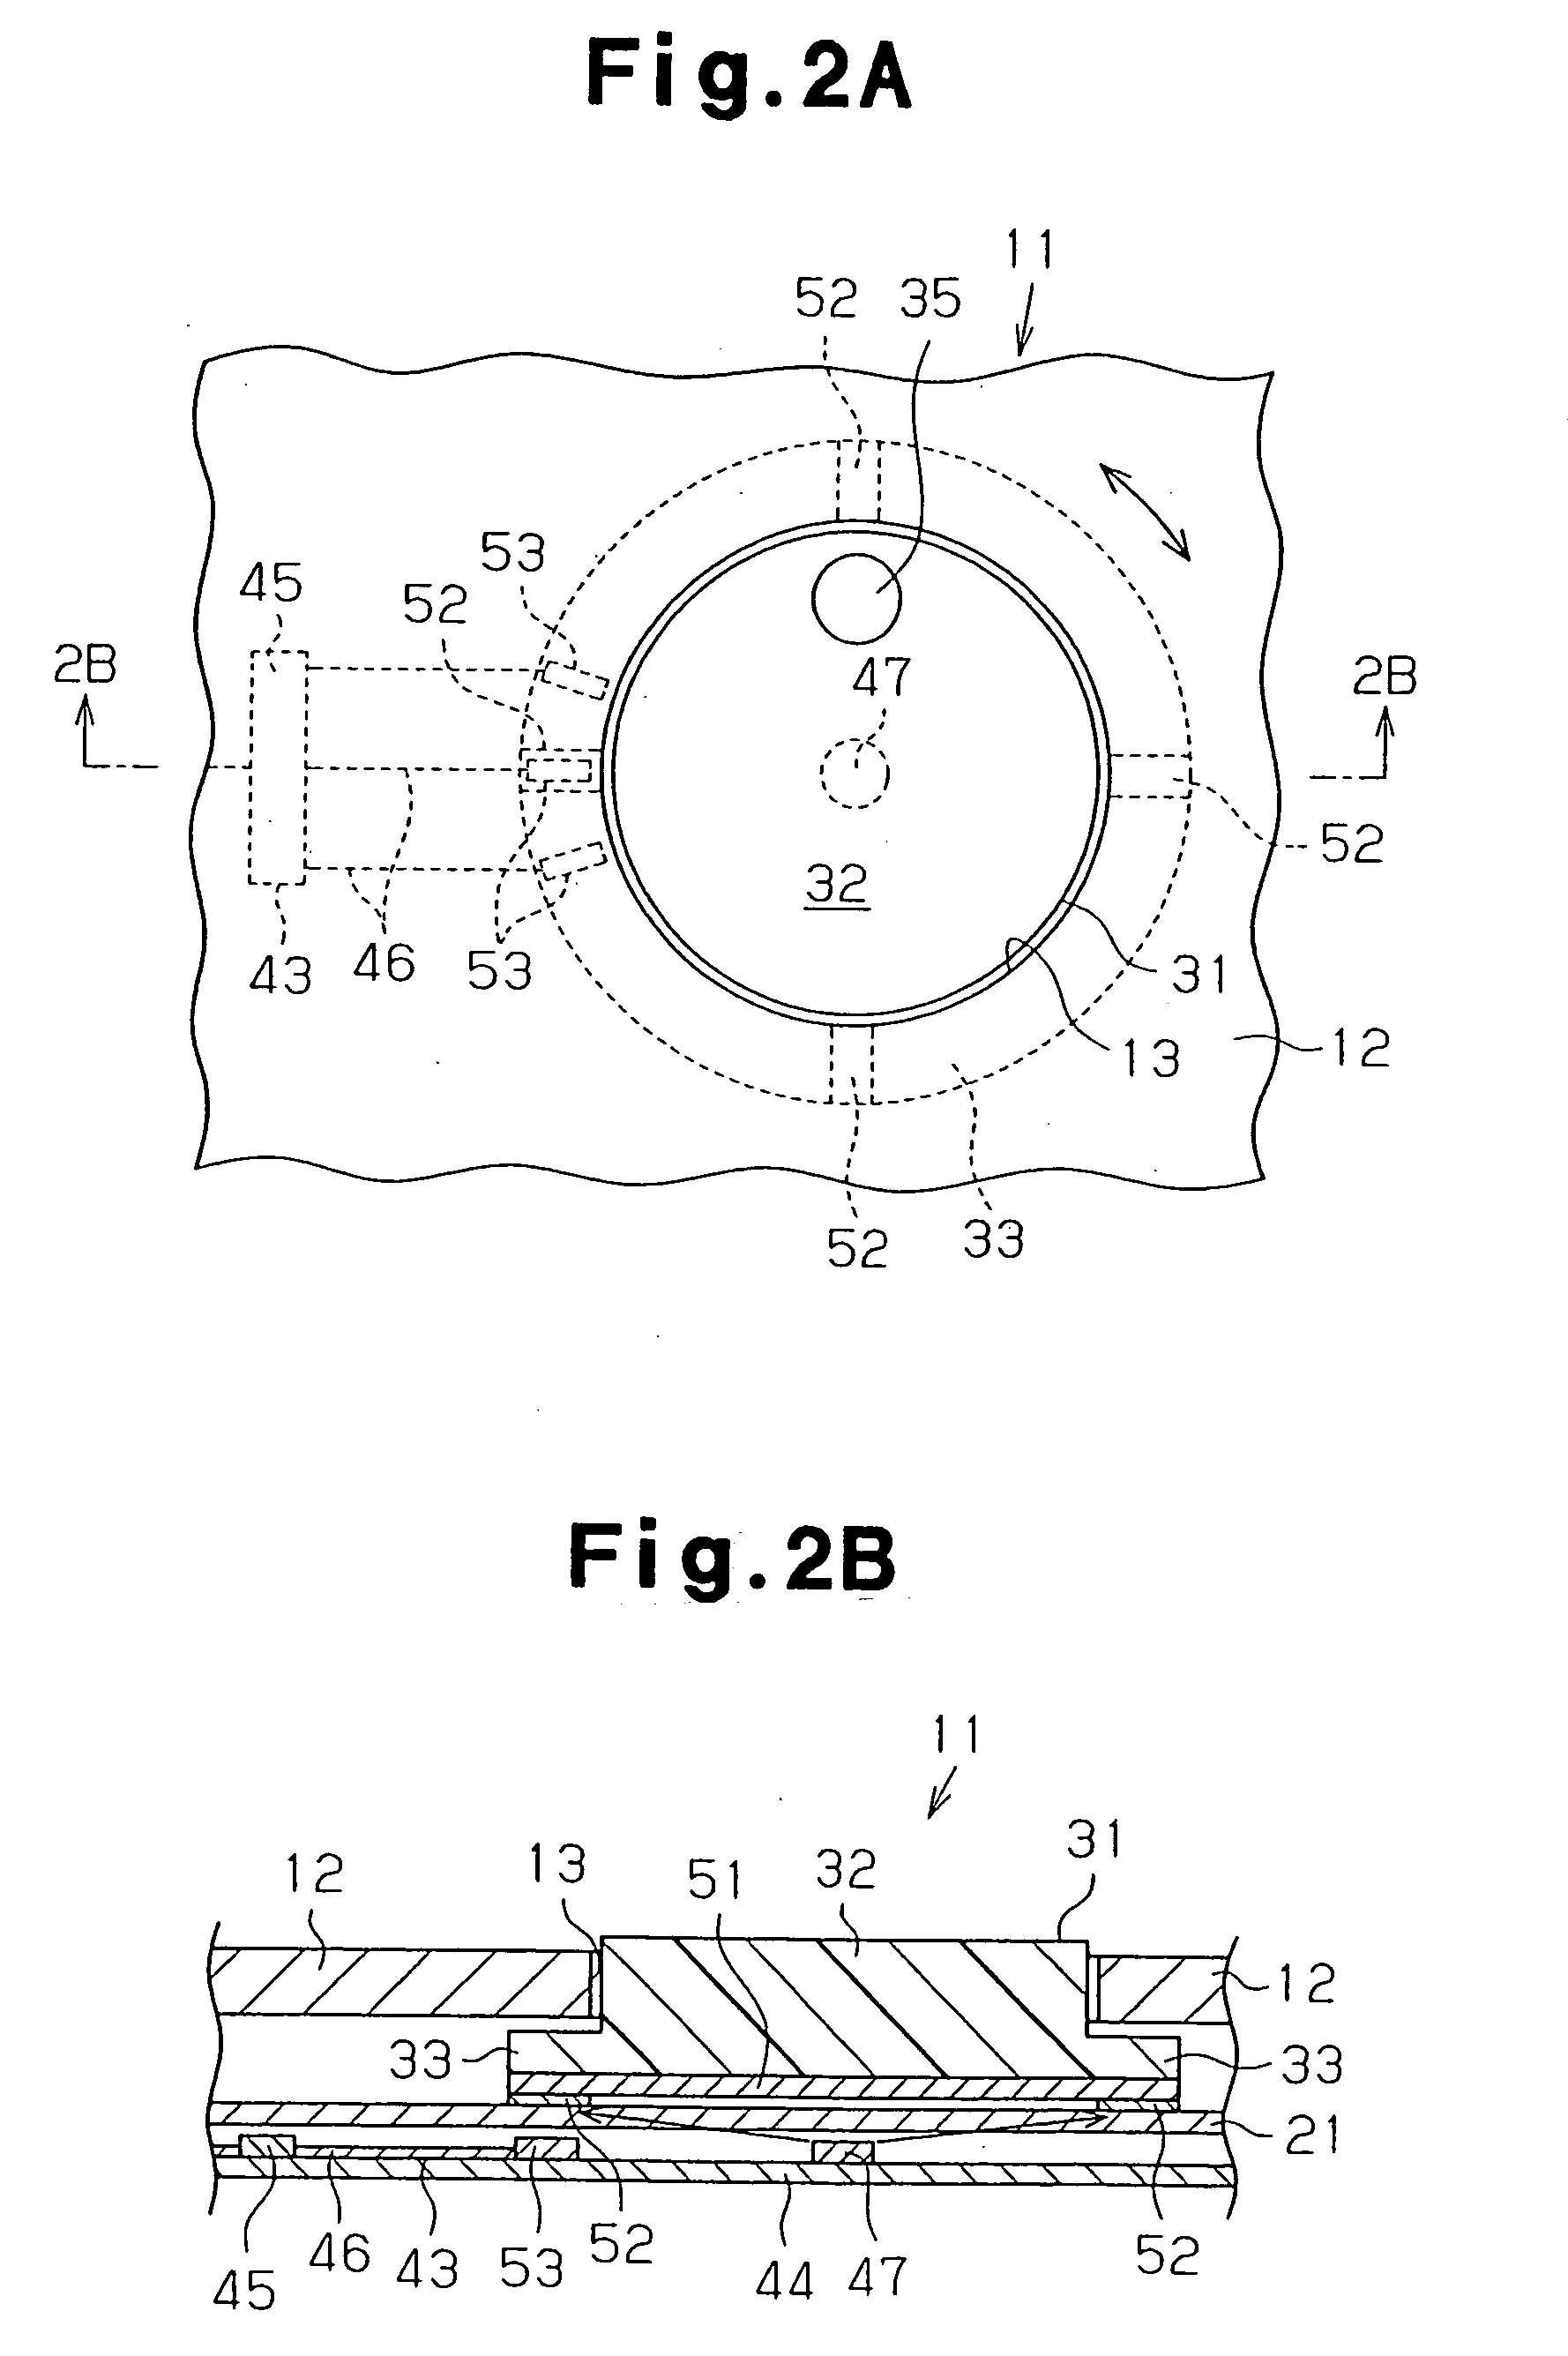 Key switch and electronic device